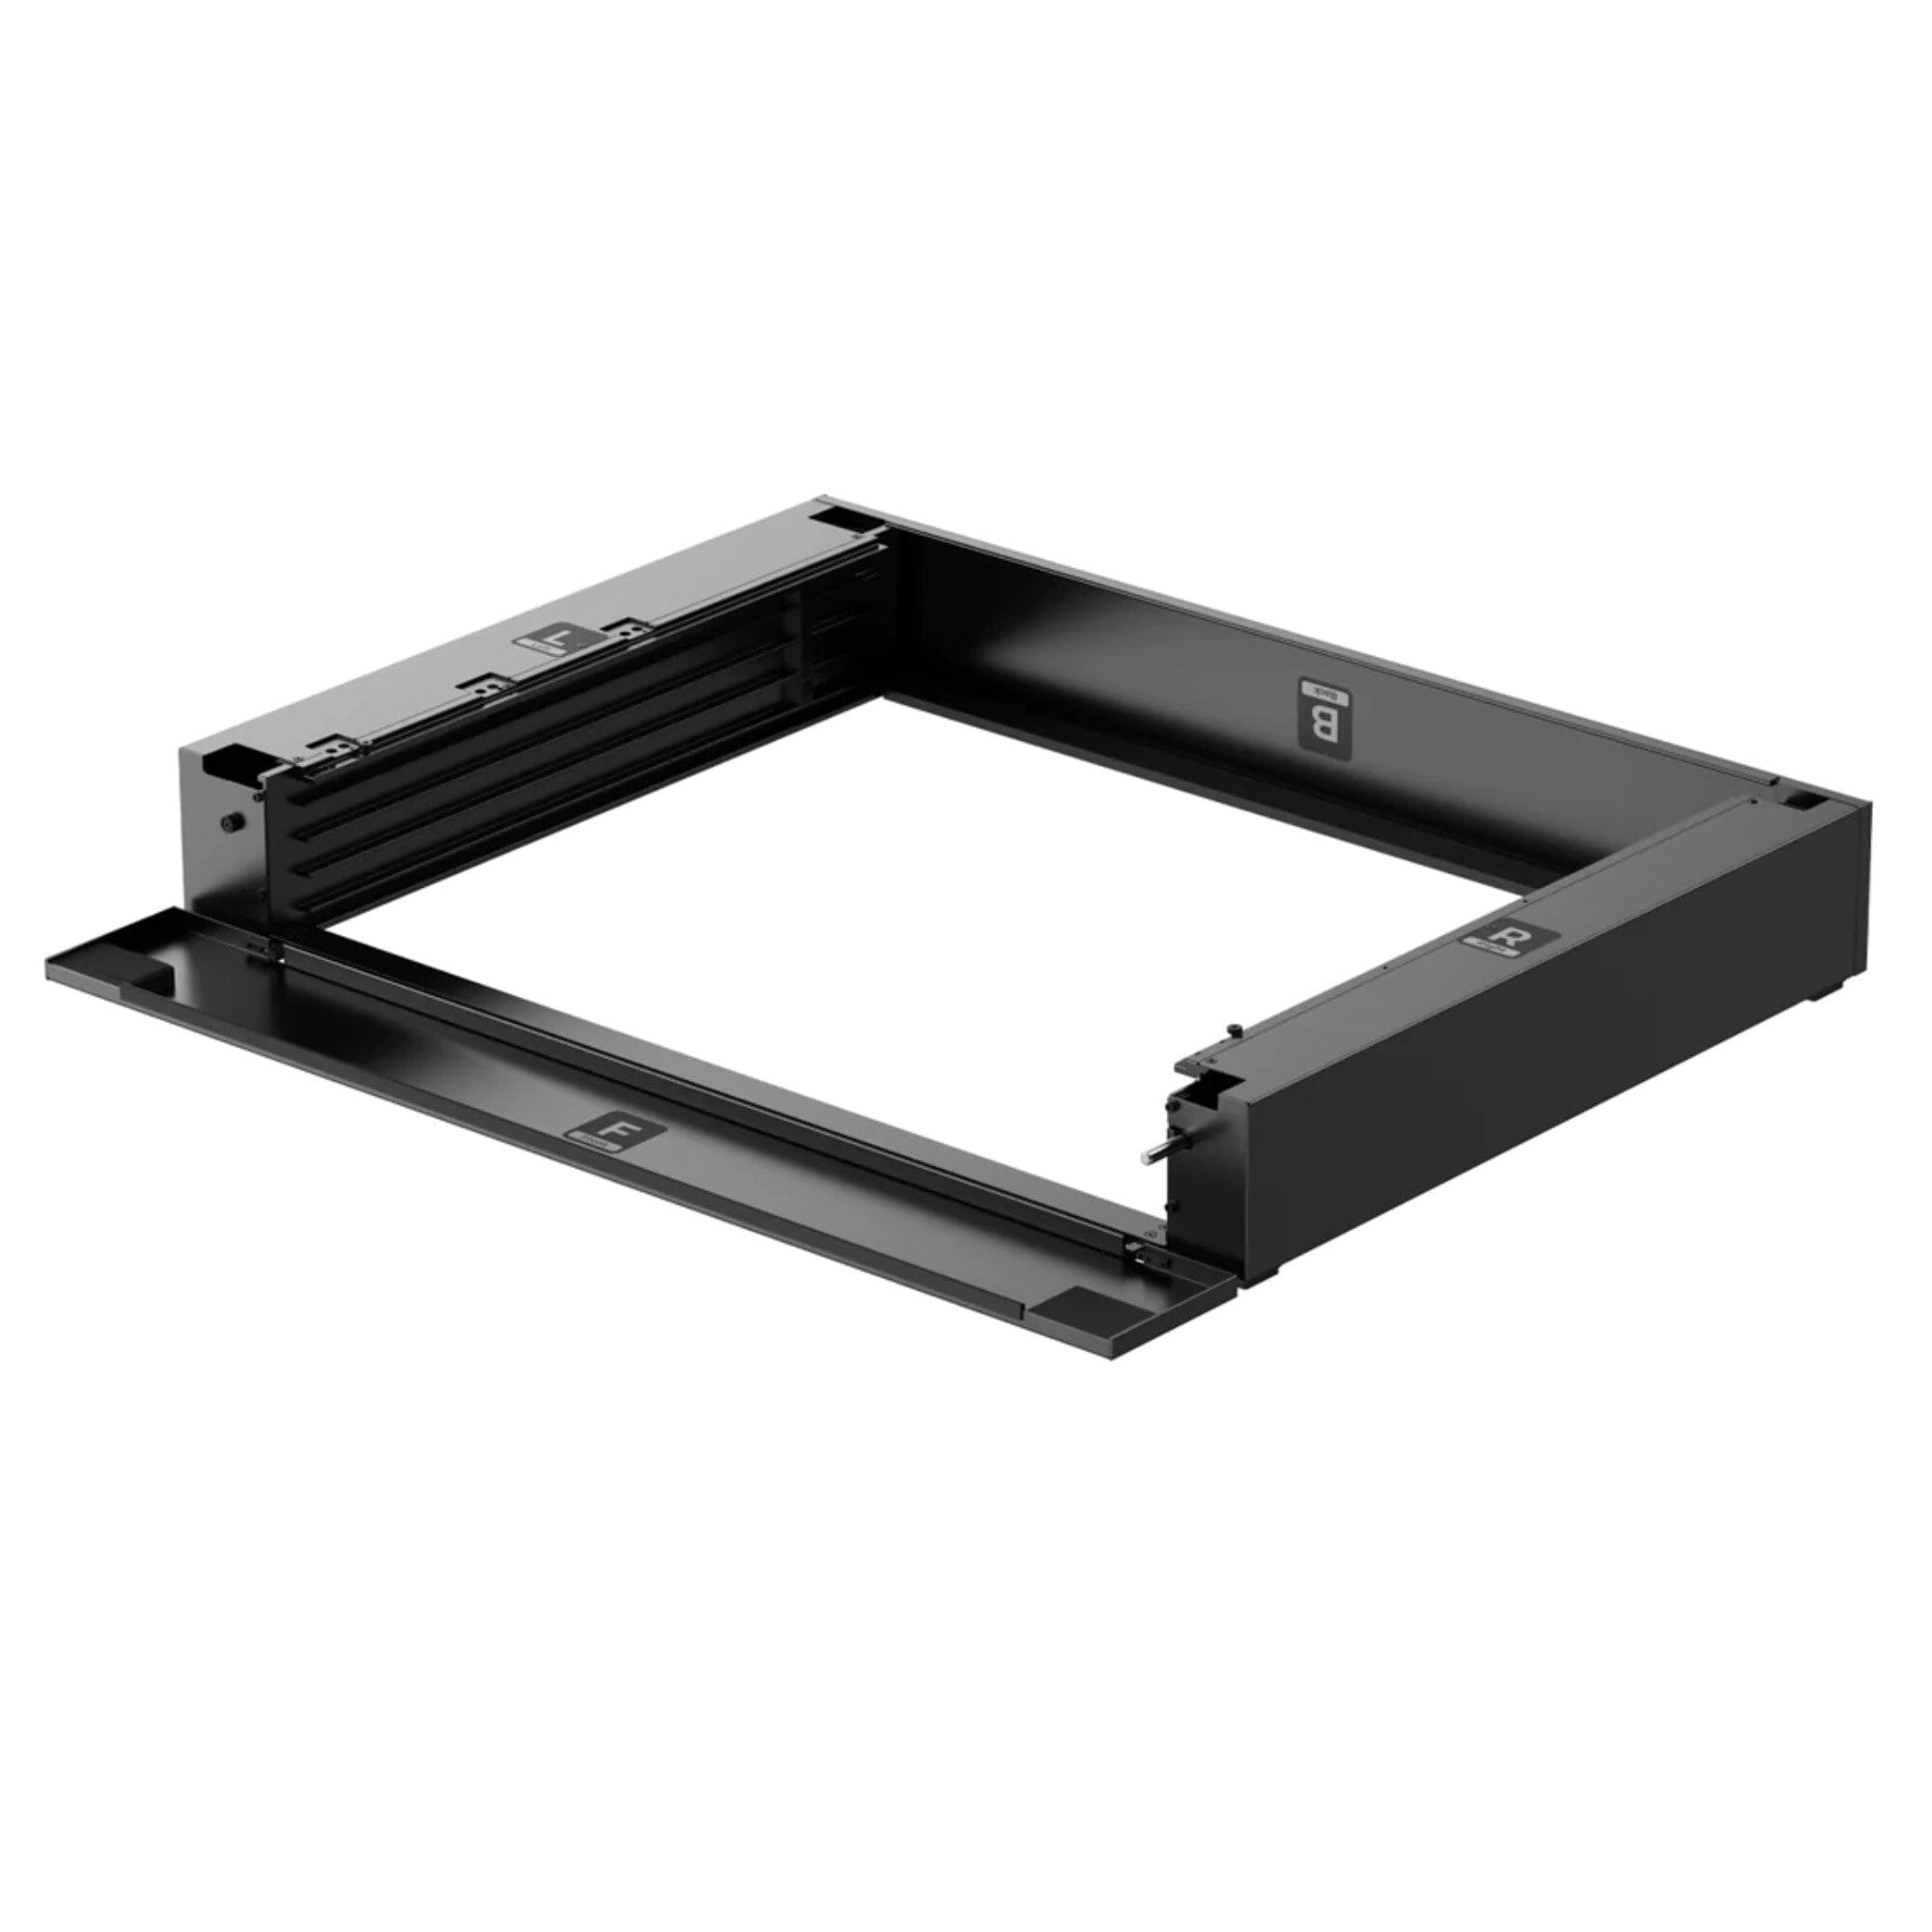 xTool S1 Riser Base - 5.3 Total Workspace Height